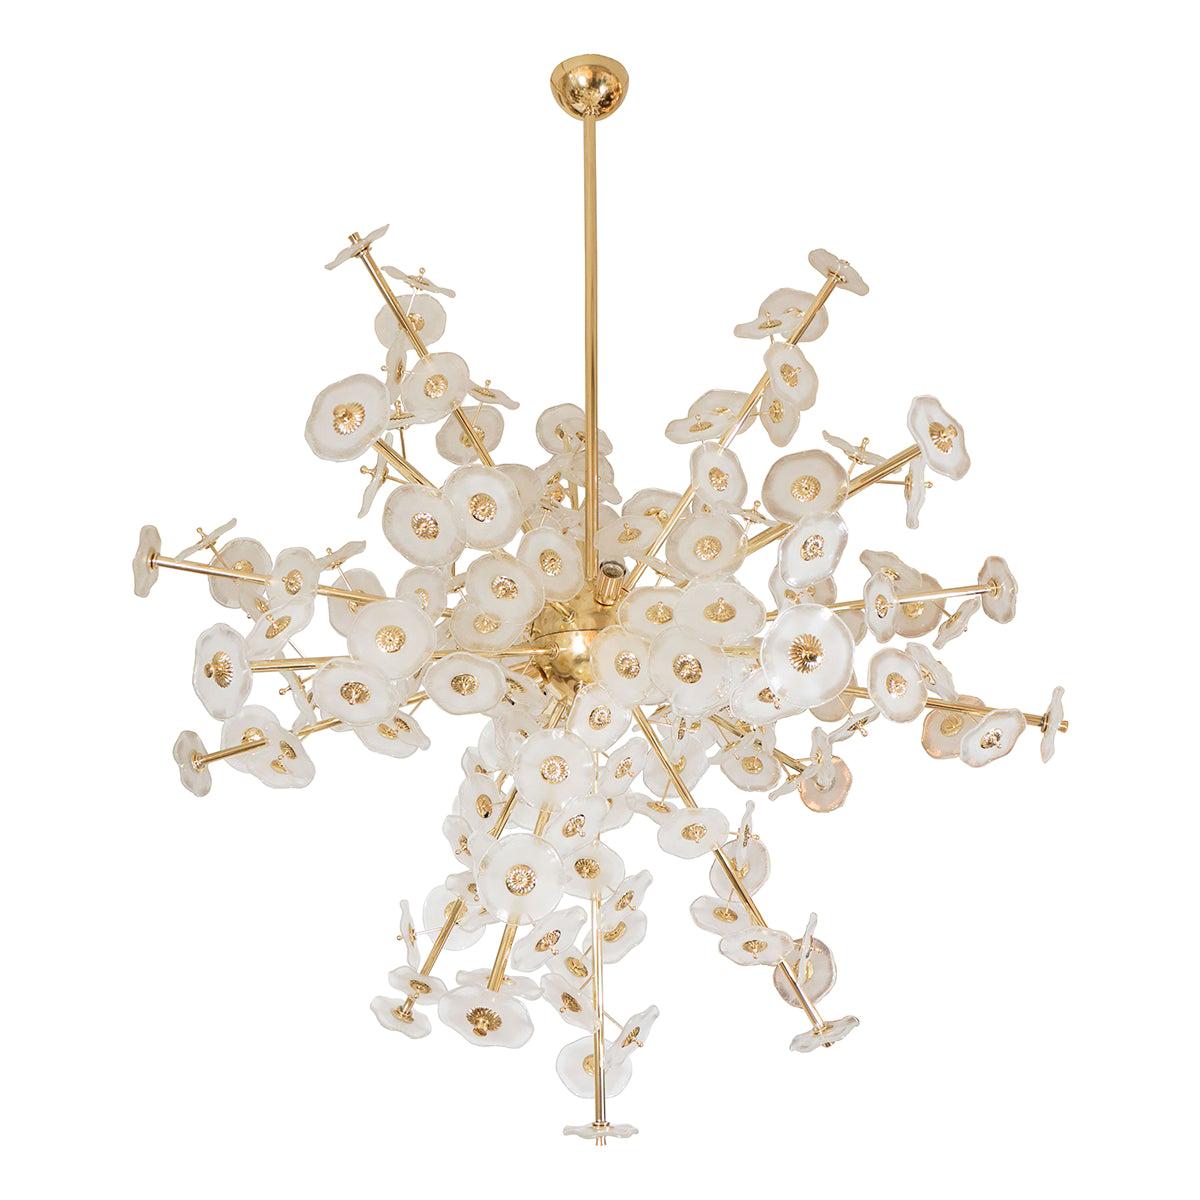 Monumental Brass Flower Burst Chandelier Featuring Frosted Glass Blossoms